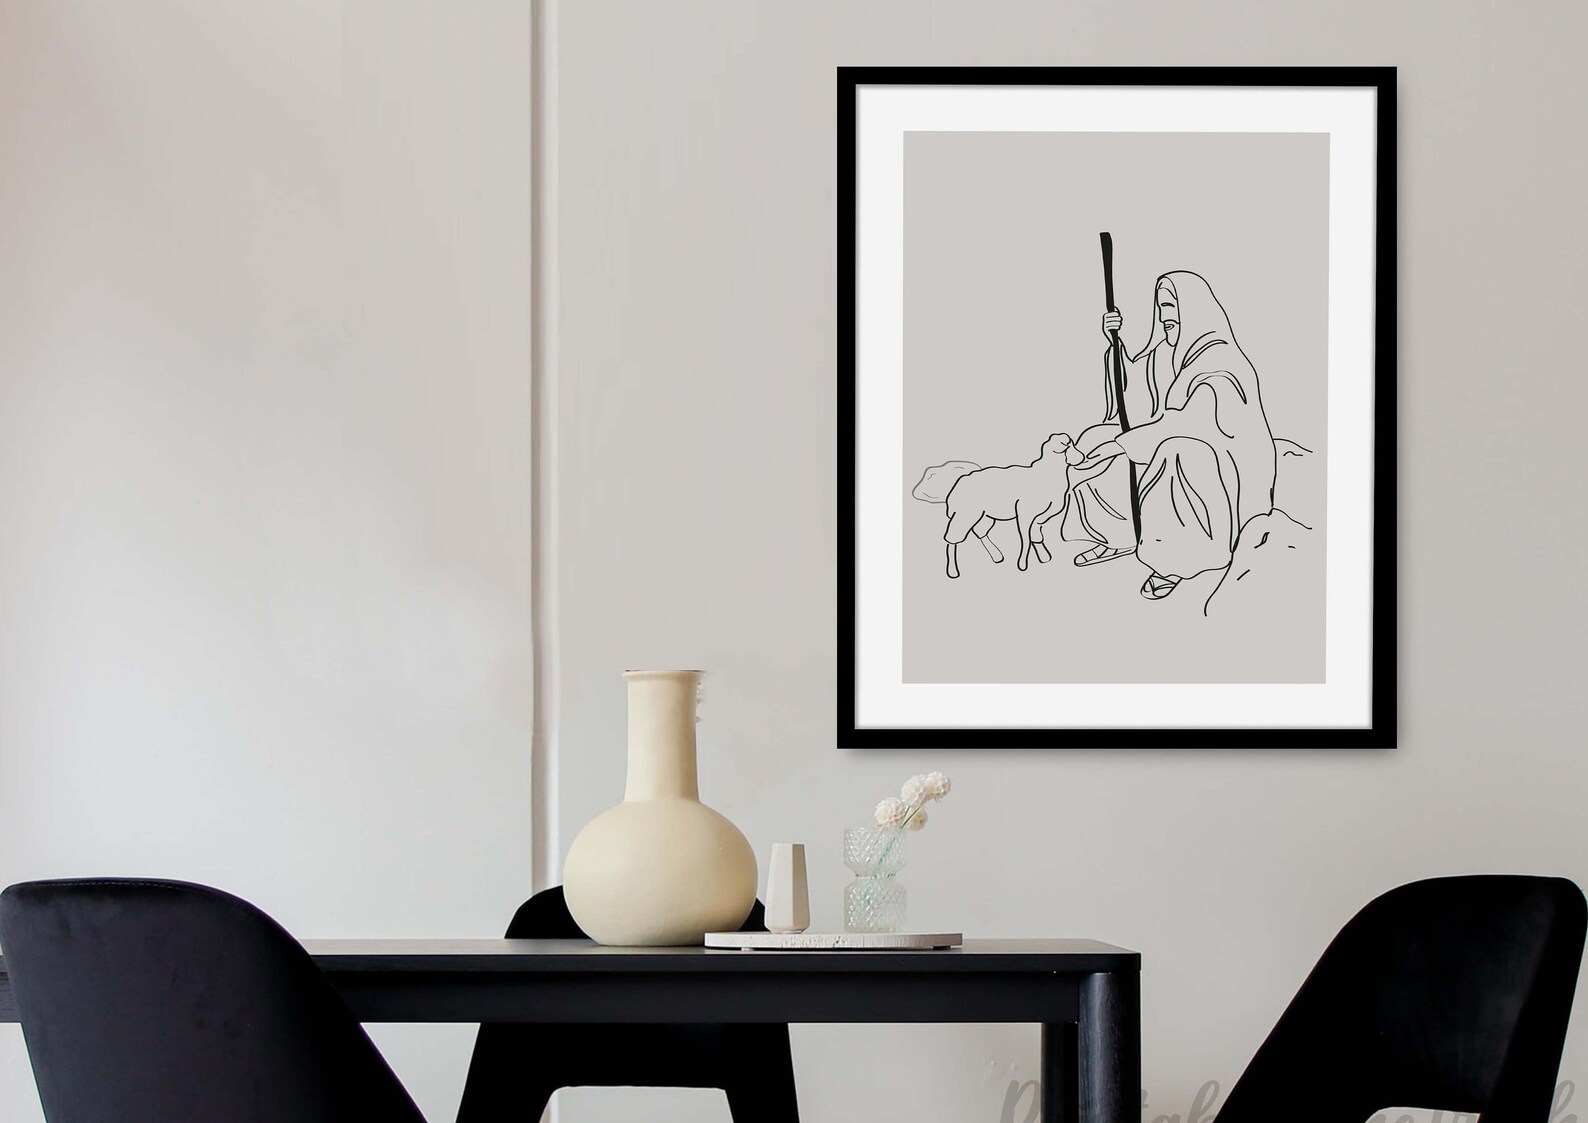 The Parable of the Lost Sheep Modern Prints Jesus Christ - Etsy